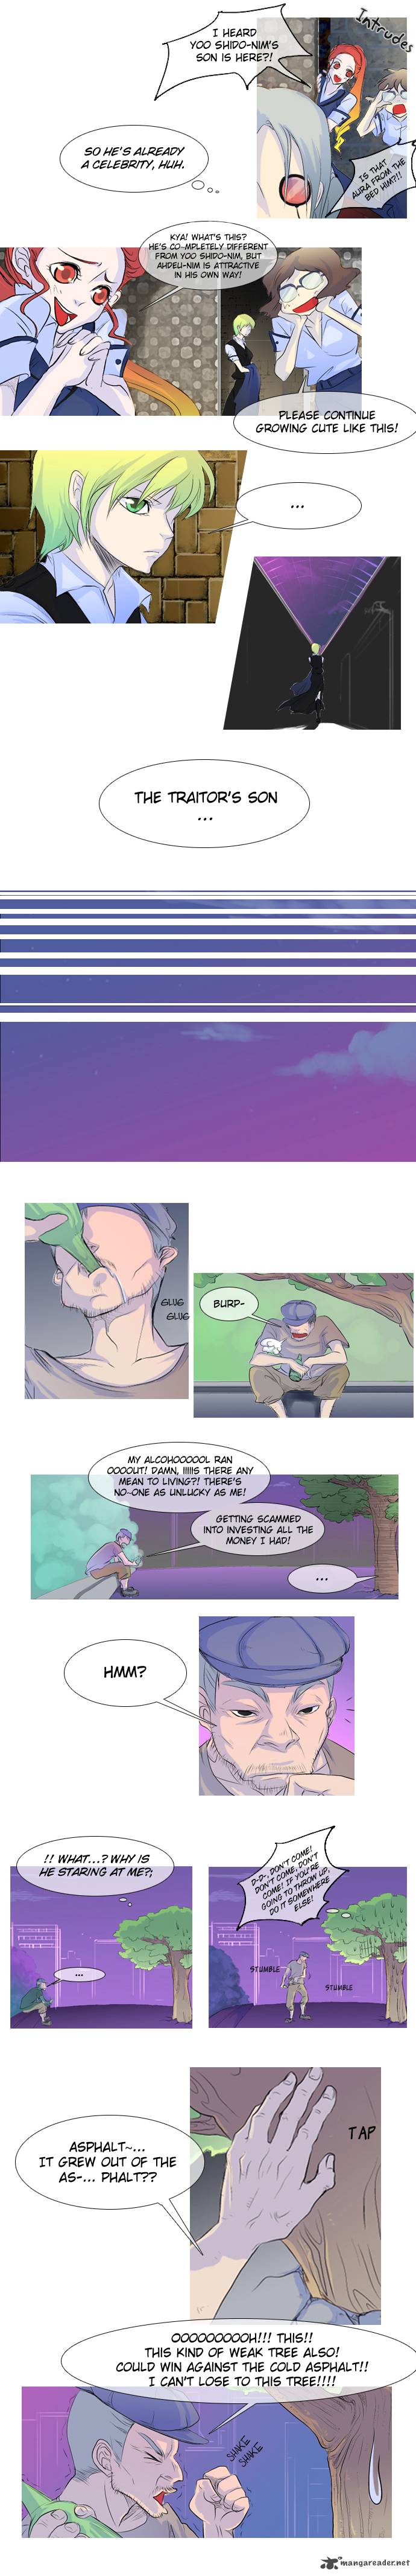 Timeline Chapter 5 Page 3